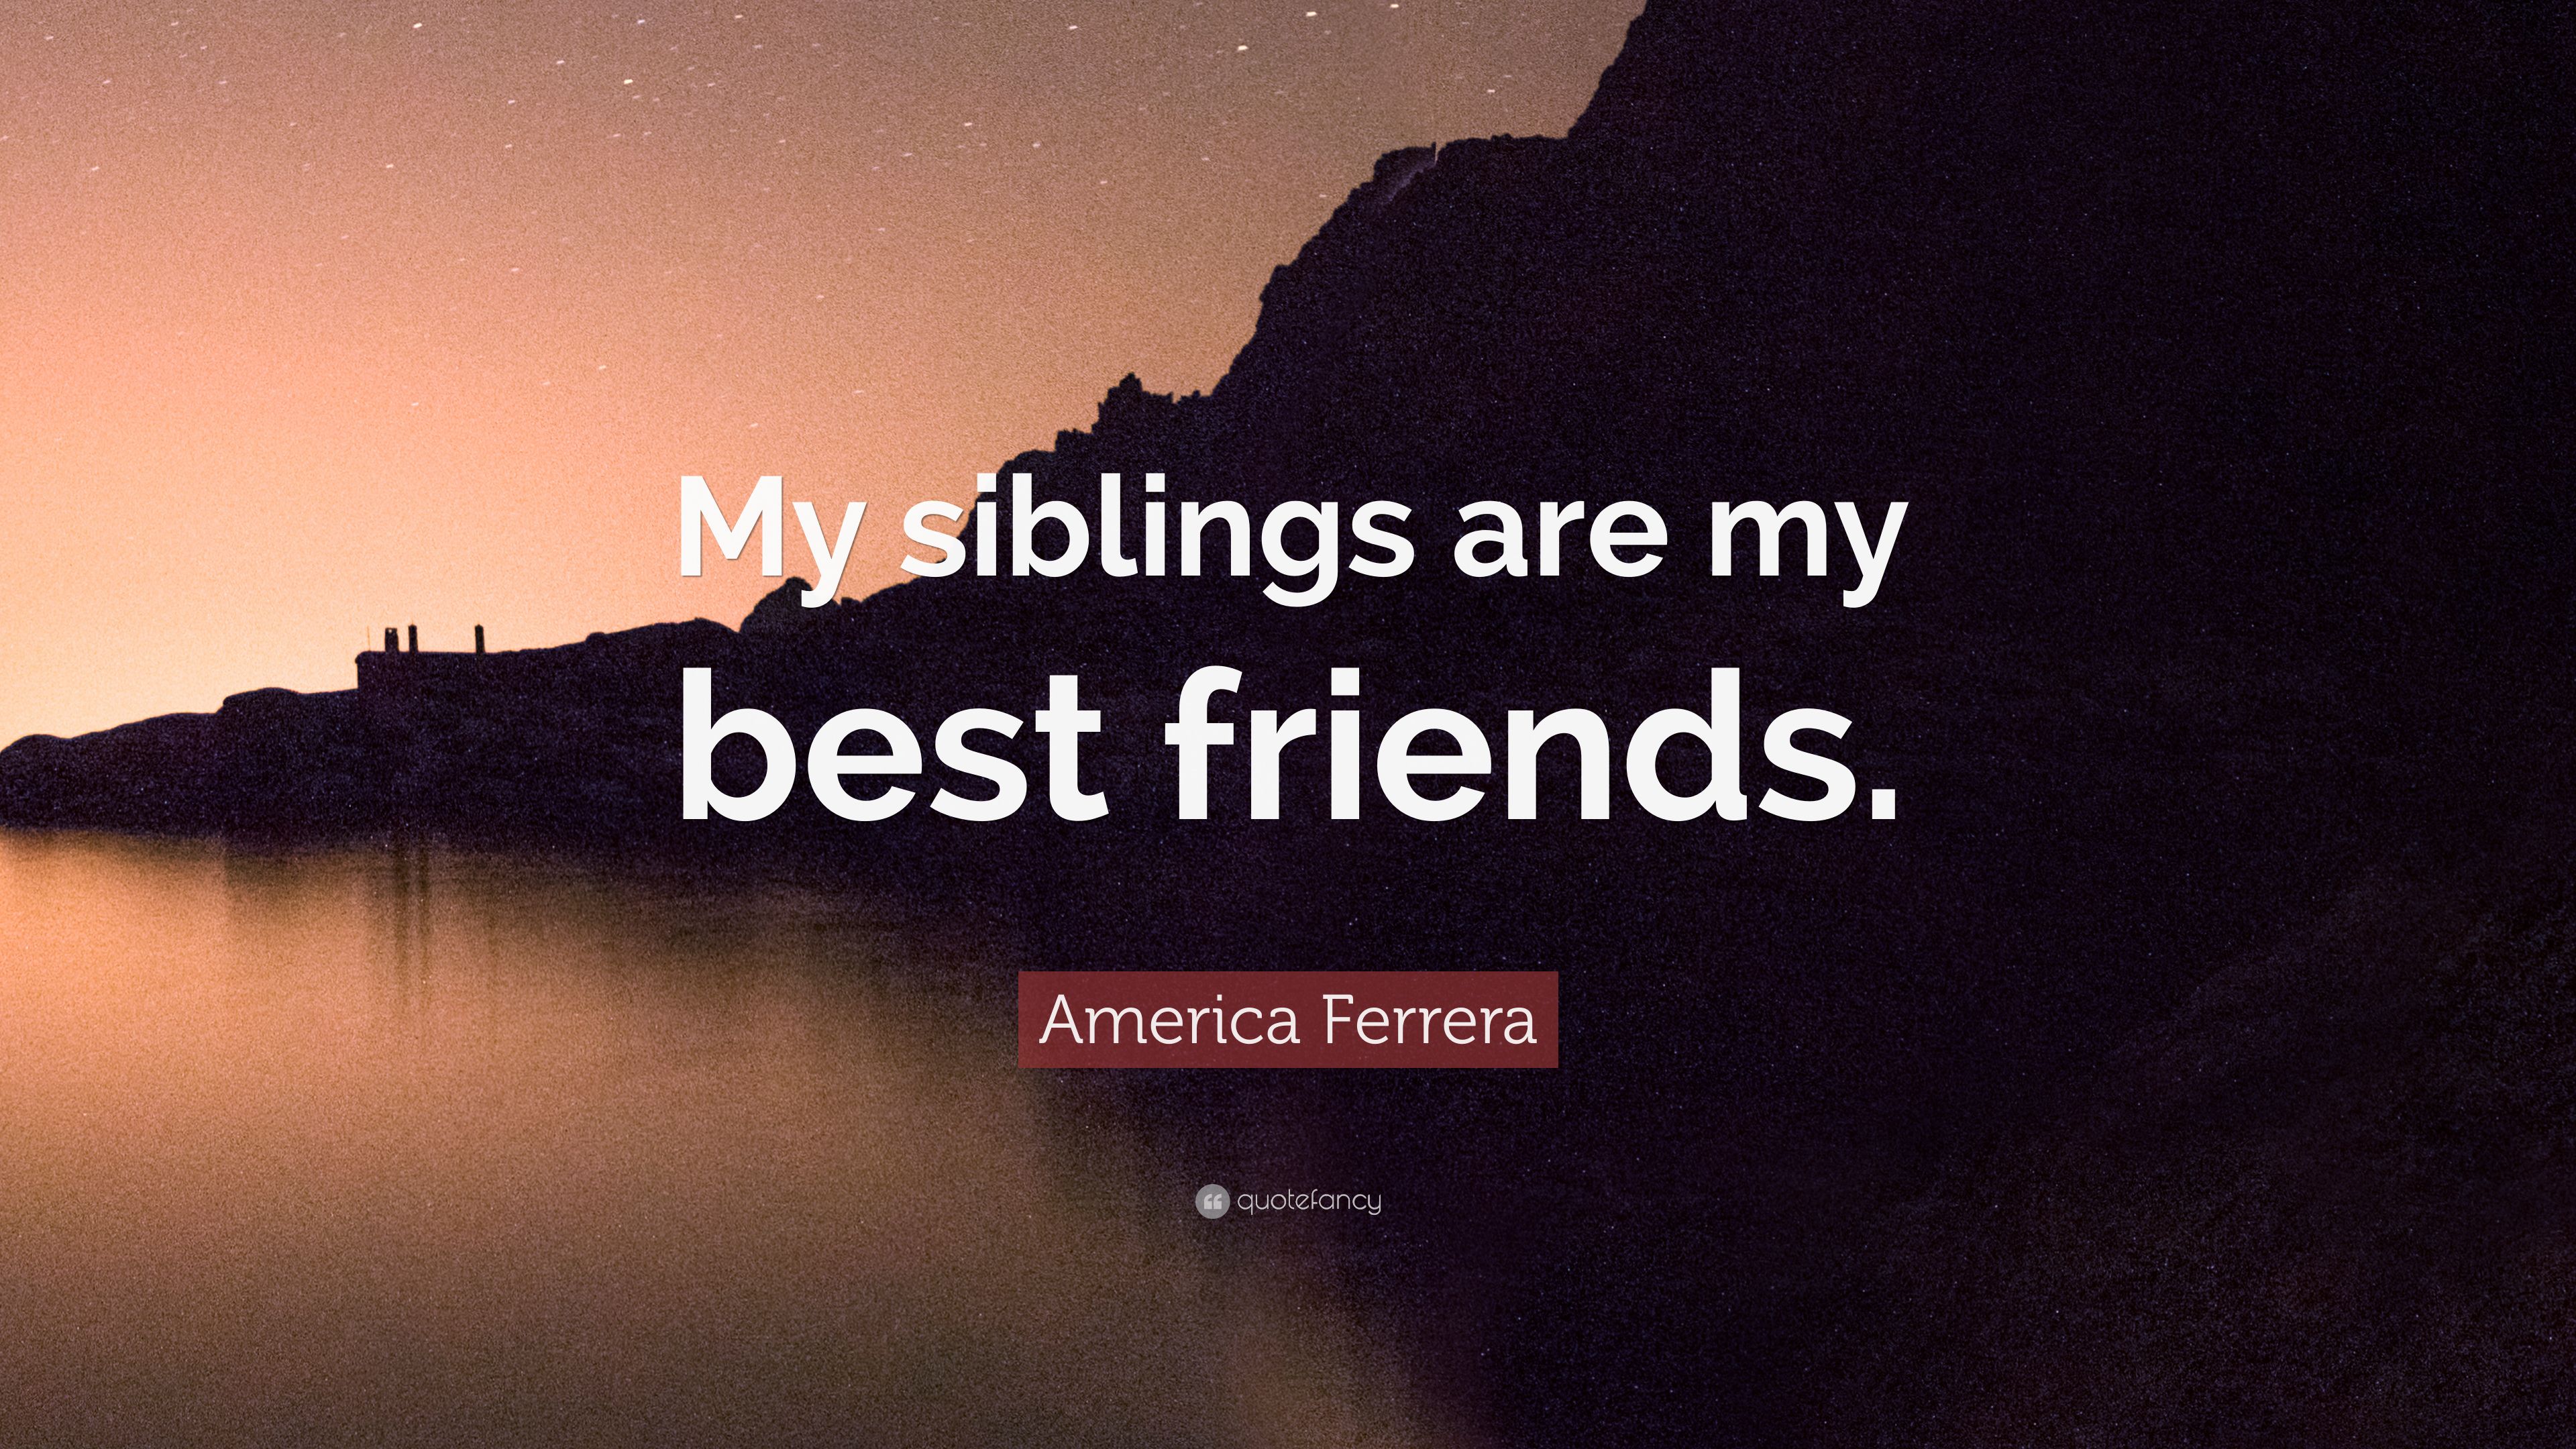 America Ferrera Quote: “My siblings are .quotefancy.com